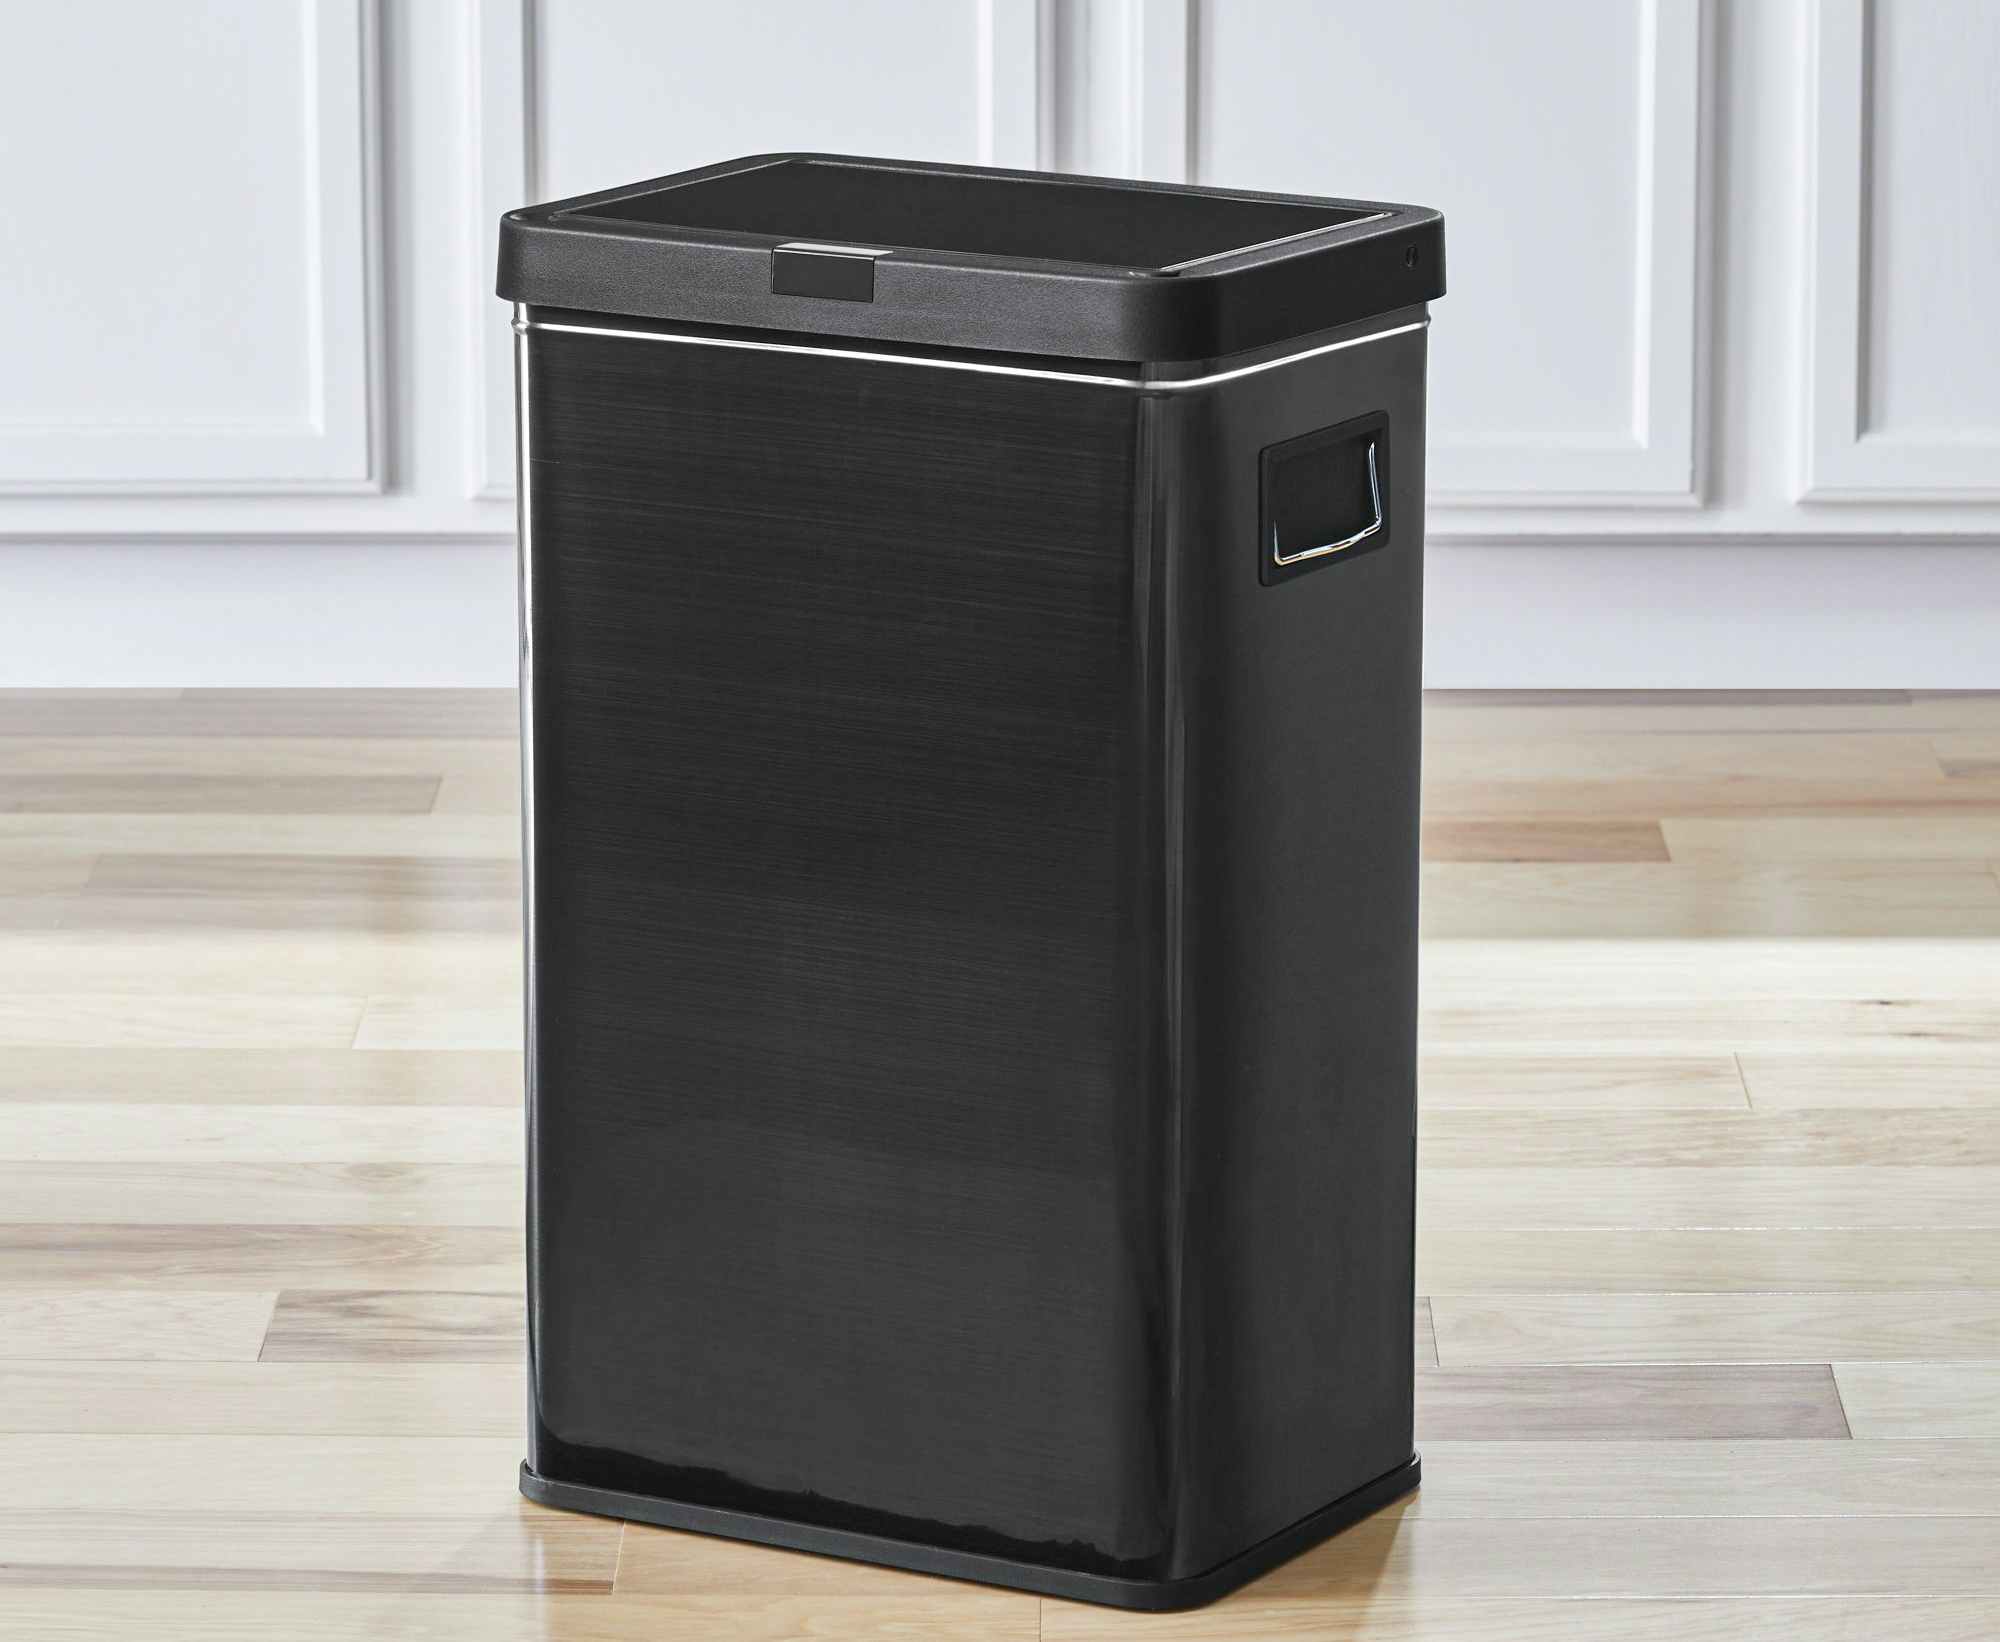 walmart better homes and gardens touchless trash can screenshot